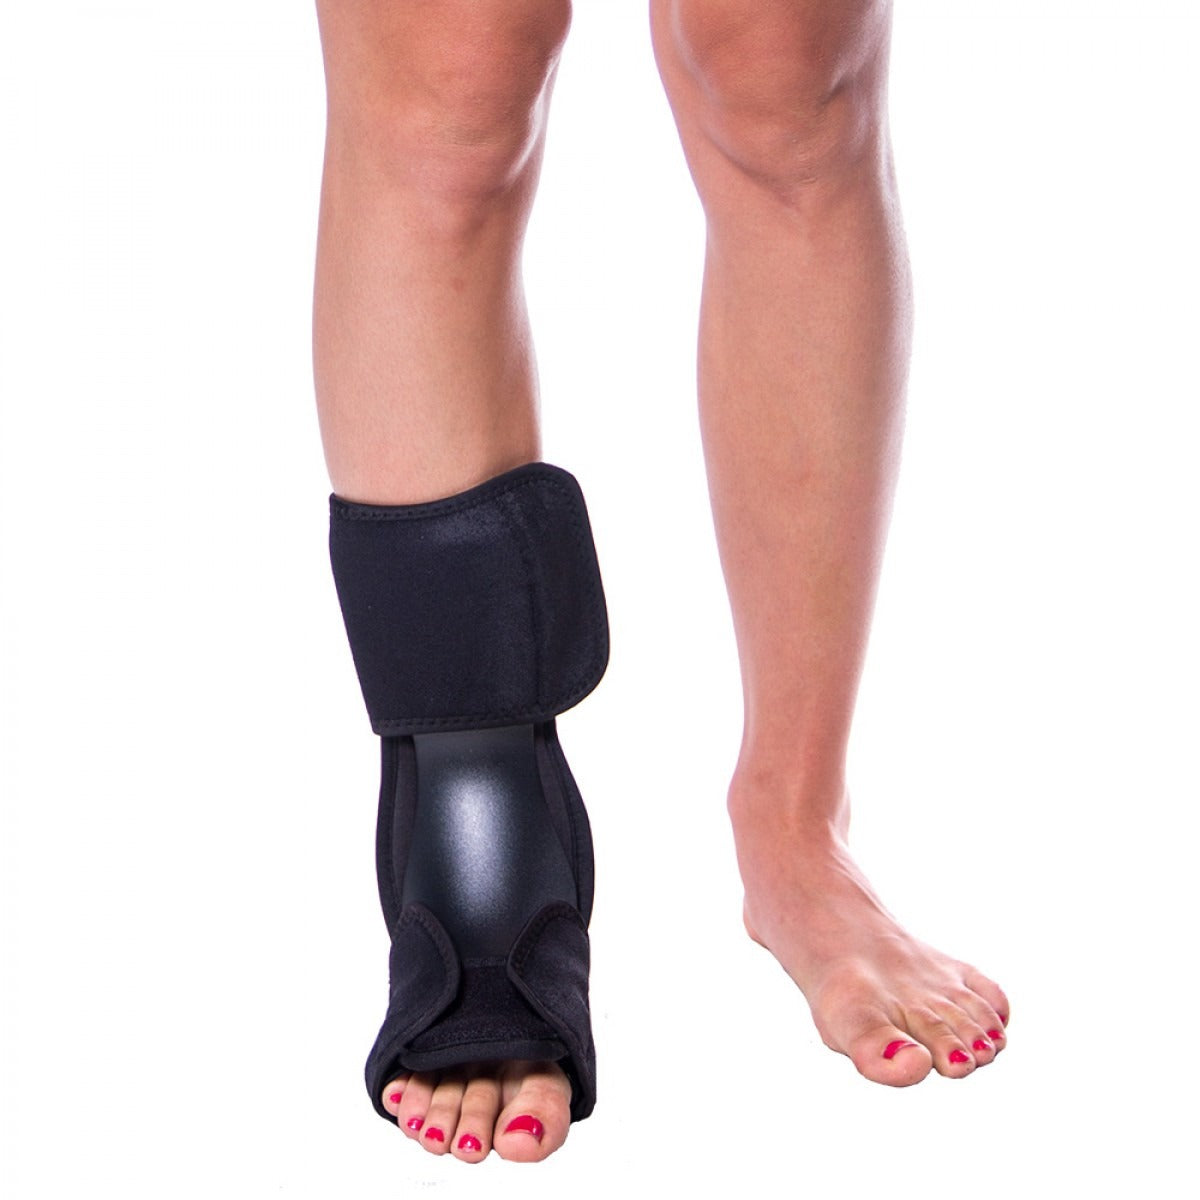 The foot splint shell is composed of durable, high-density polyethylene